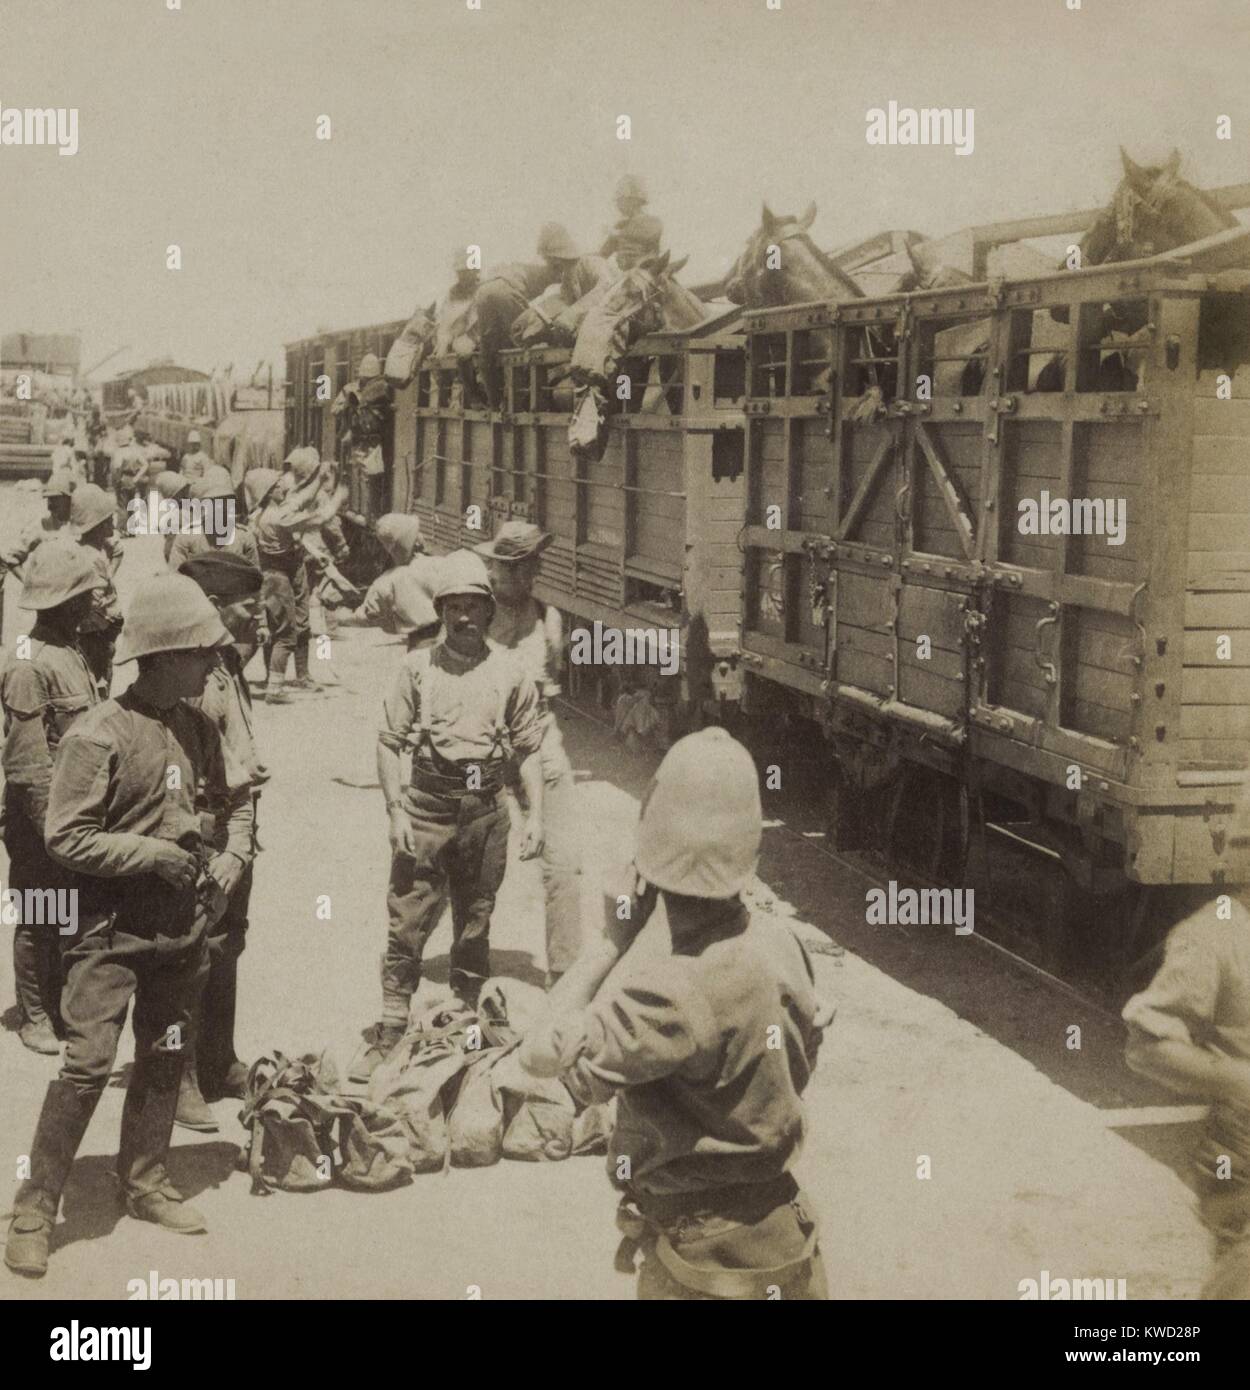 British soldiers and horses boarding a train to the battle front during the Boer War, Feb. 1900. Their first priority was relief of the besieged cities of Ladysmith, Kimberley, and Mafeking, all taken in early Boers offensives in 1899  (BSLOC 2017 20 50) Stock Photo